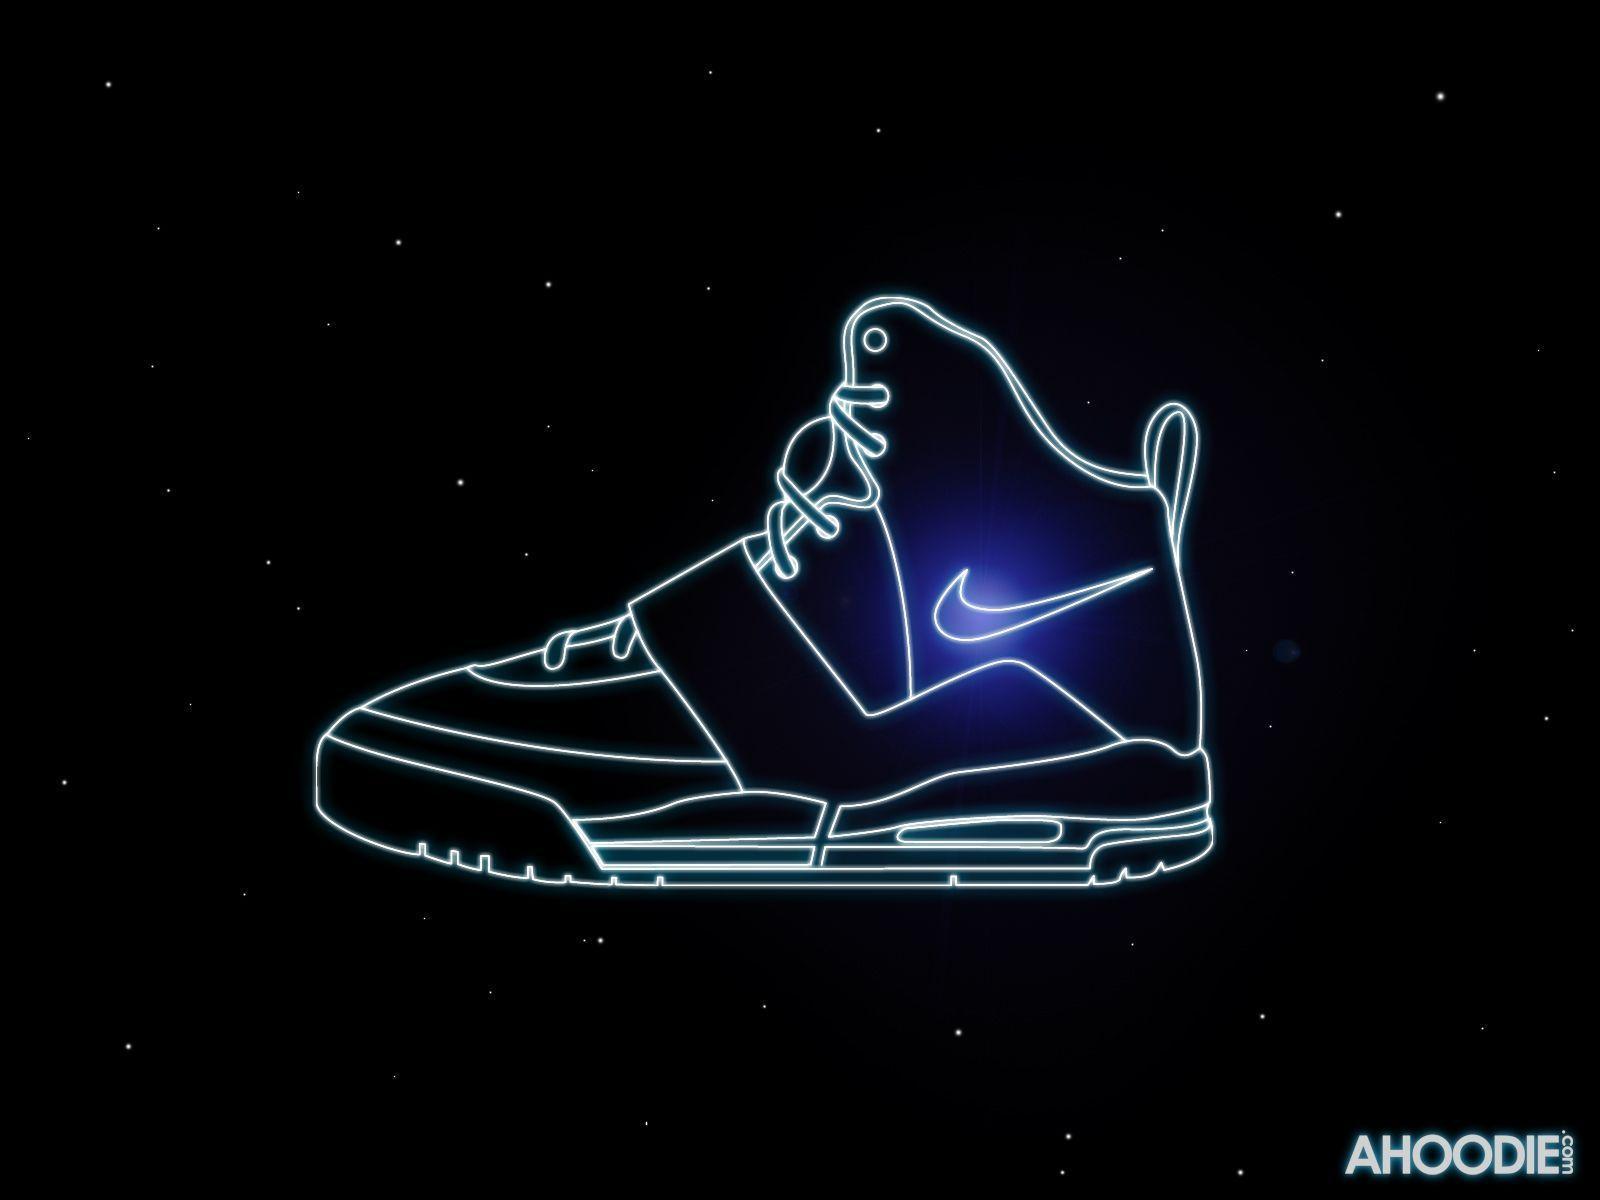 Nike Shoes Wallpaper Wallpaper Res 1600x1200PX Best Nike